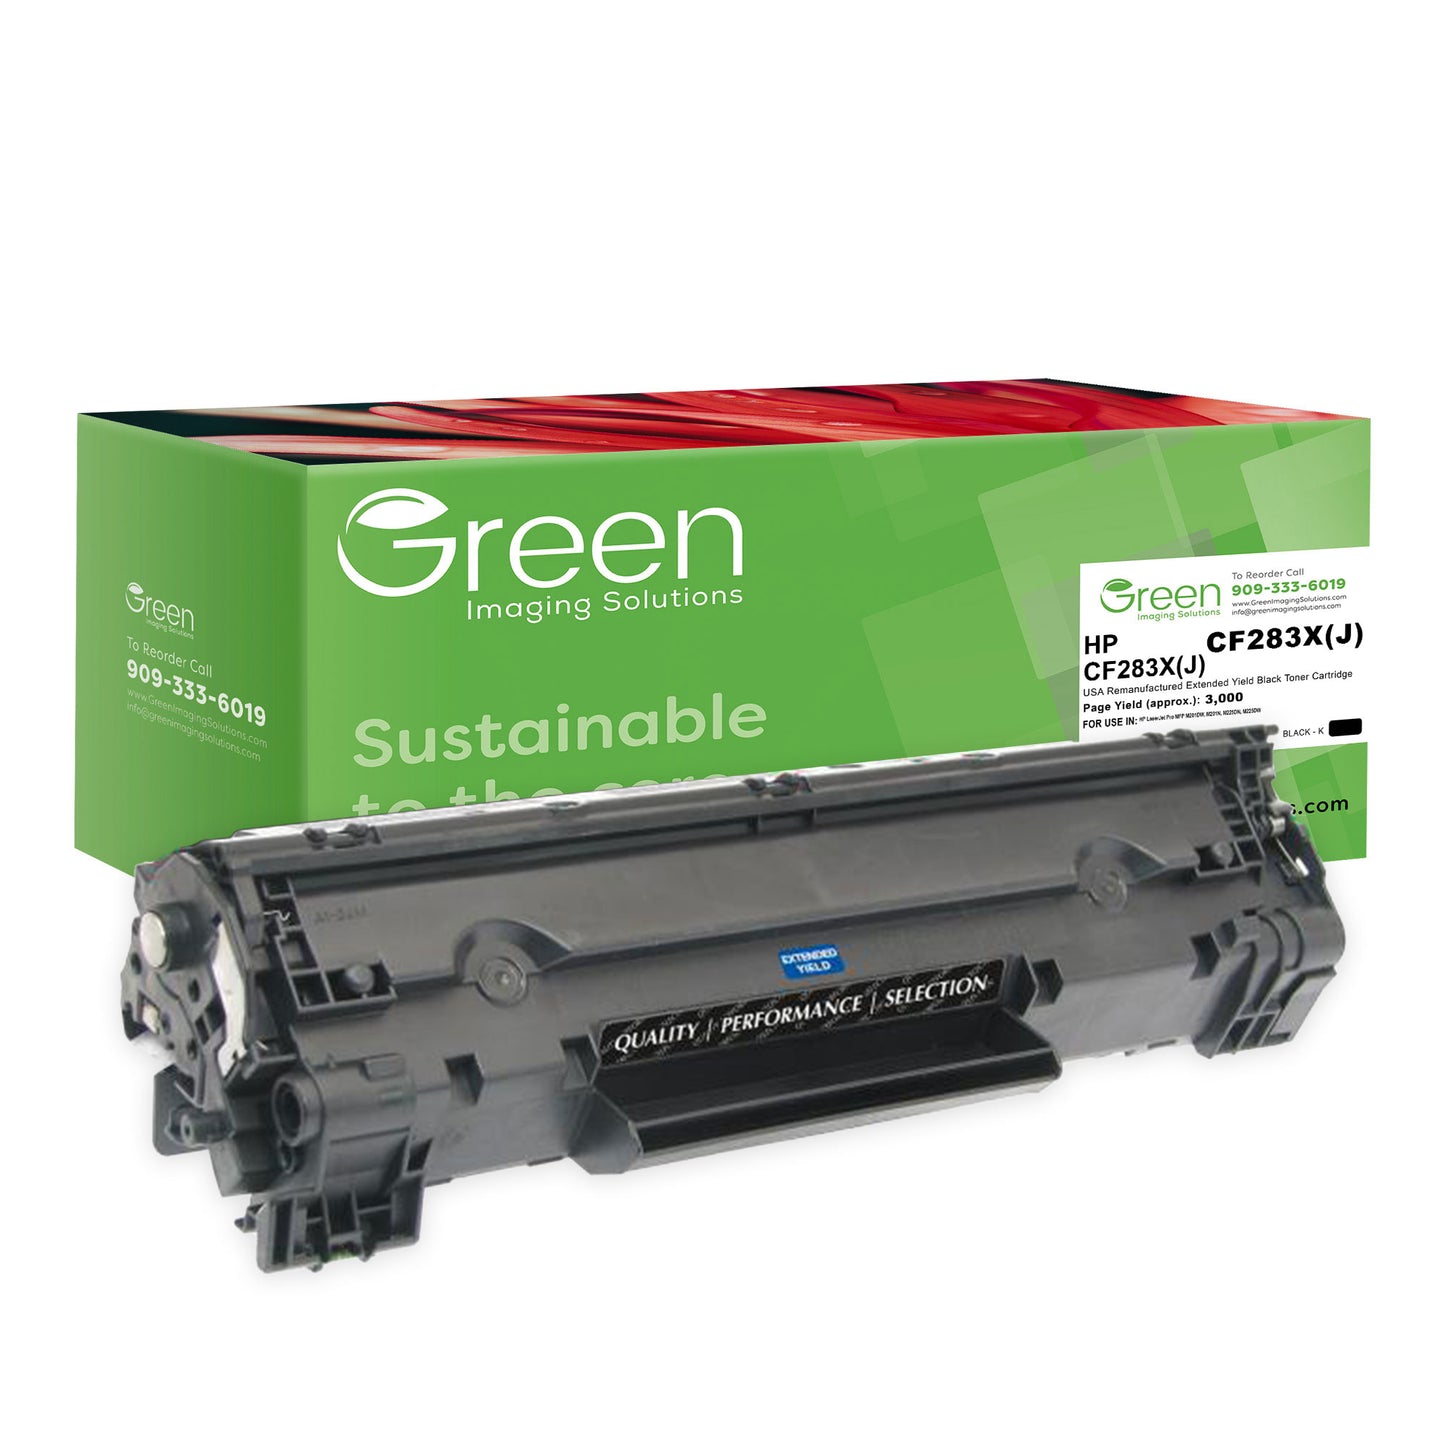 GIS USA Remanufactured Extended Yield Toner Cartridge for HP CF283X